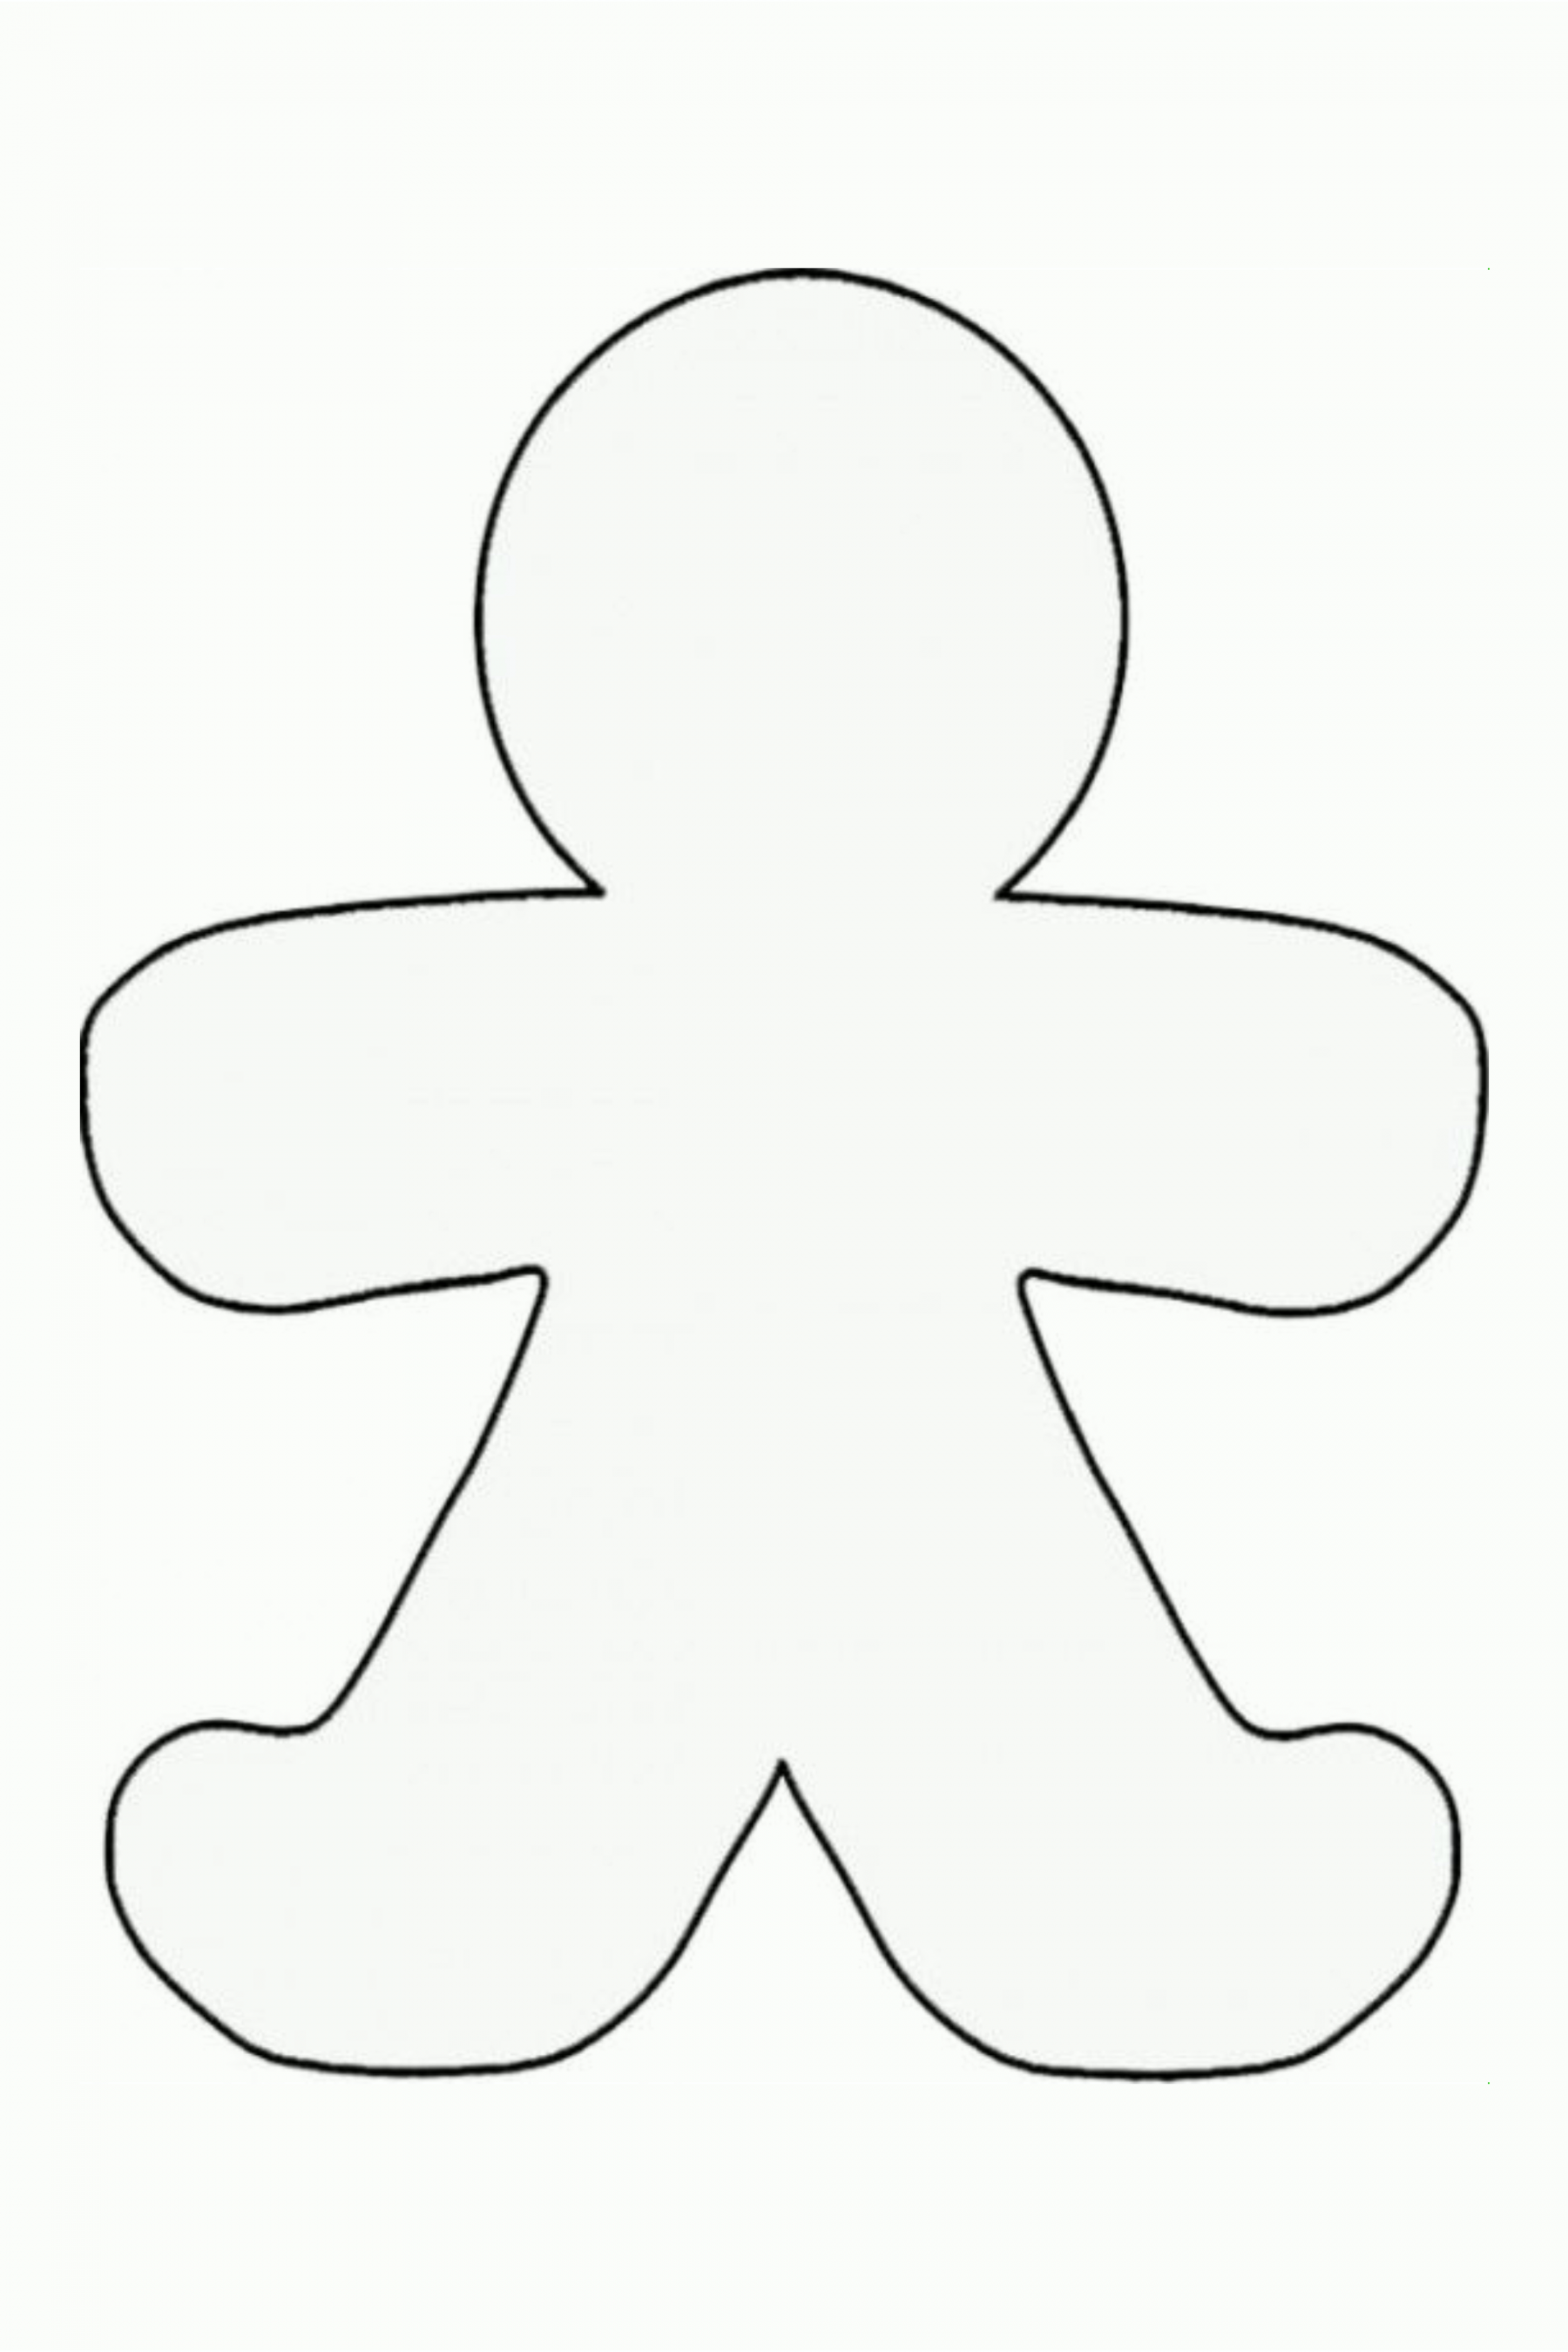 Gingerbread Person Template - FREE Printables - Gingerbread Person Outline